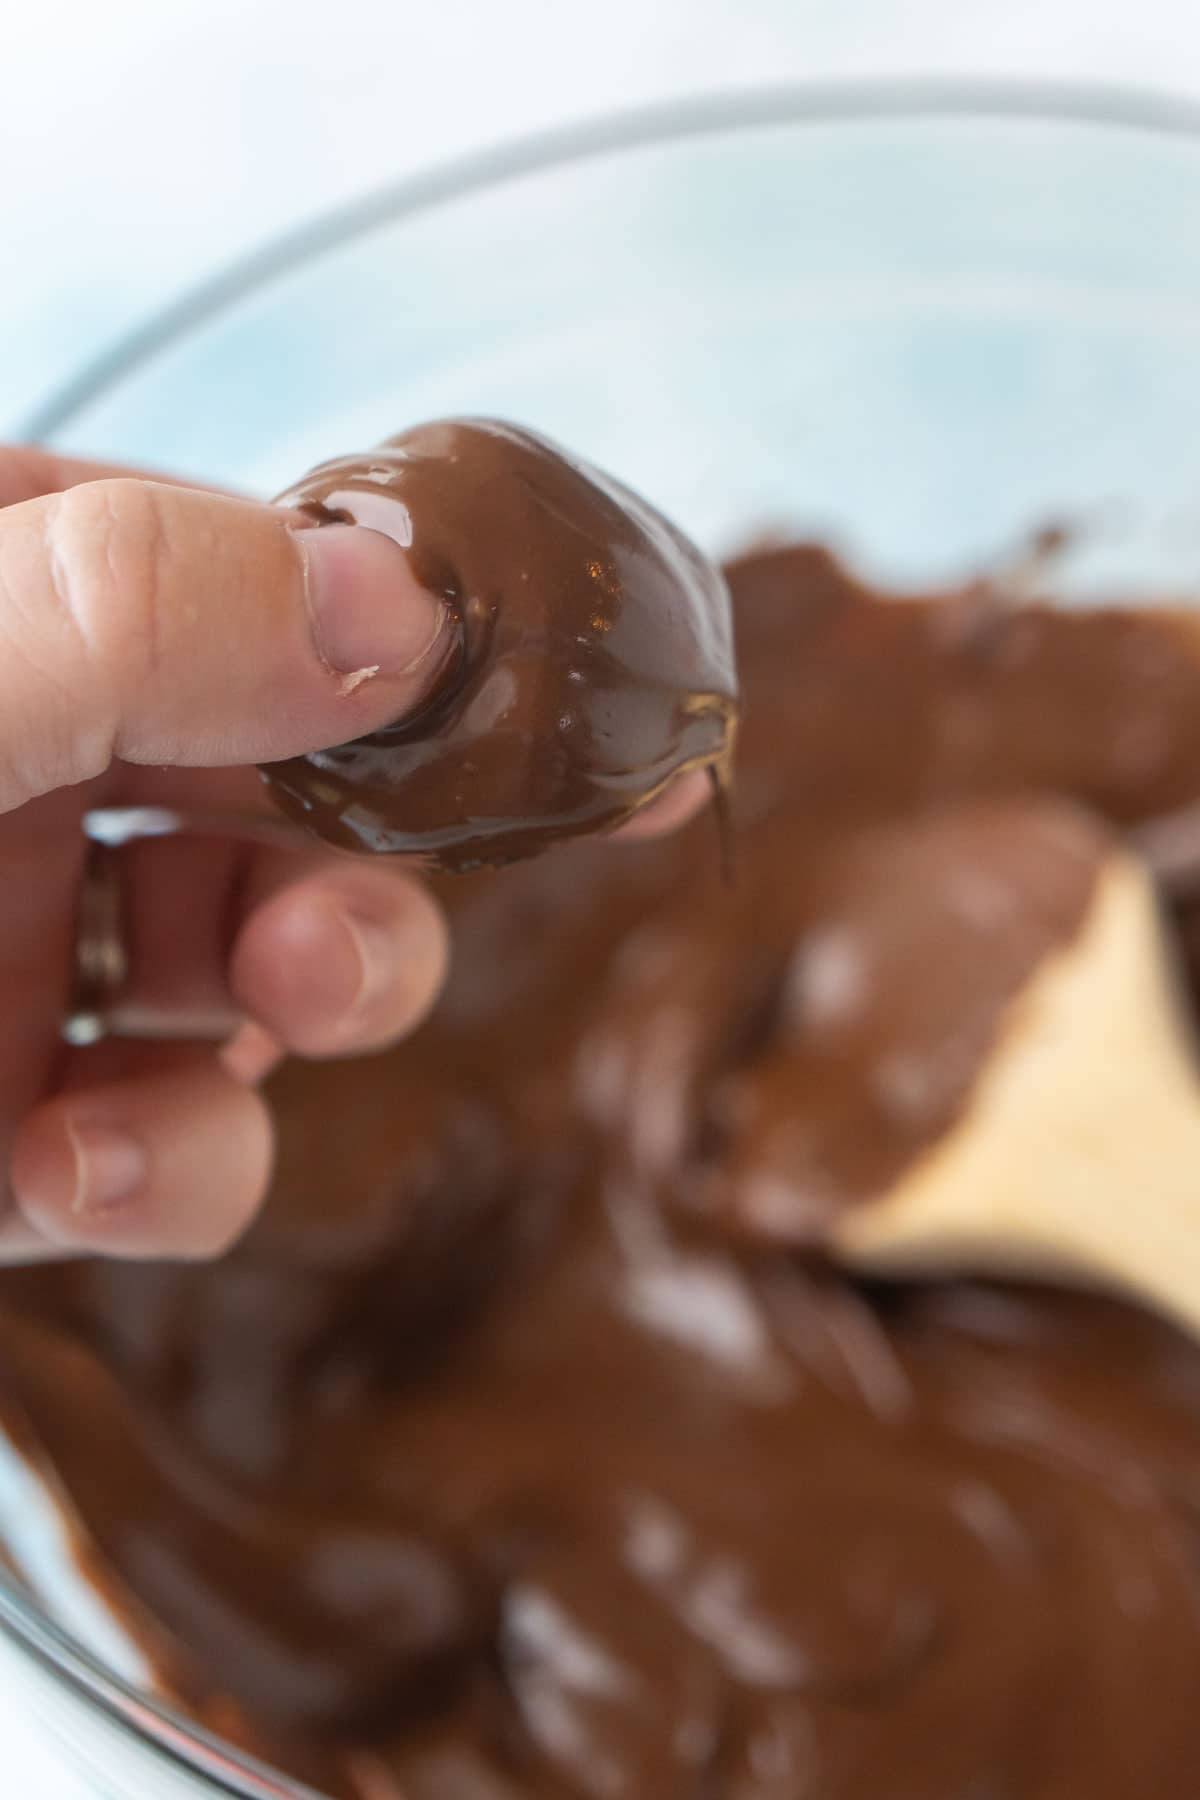 Woman's hand holding an Oreo truffle dipped in chocolate 